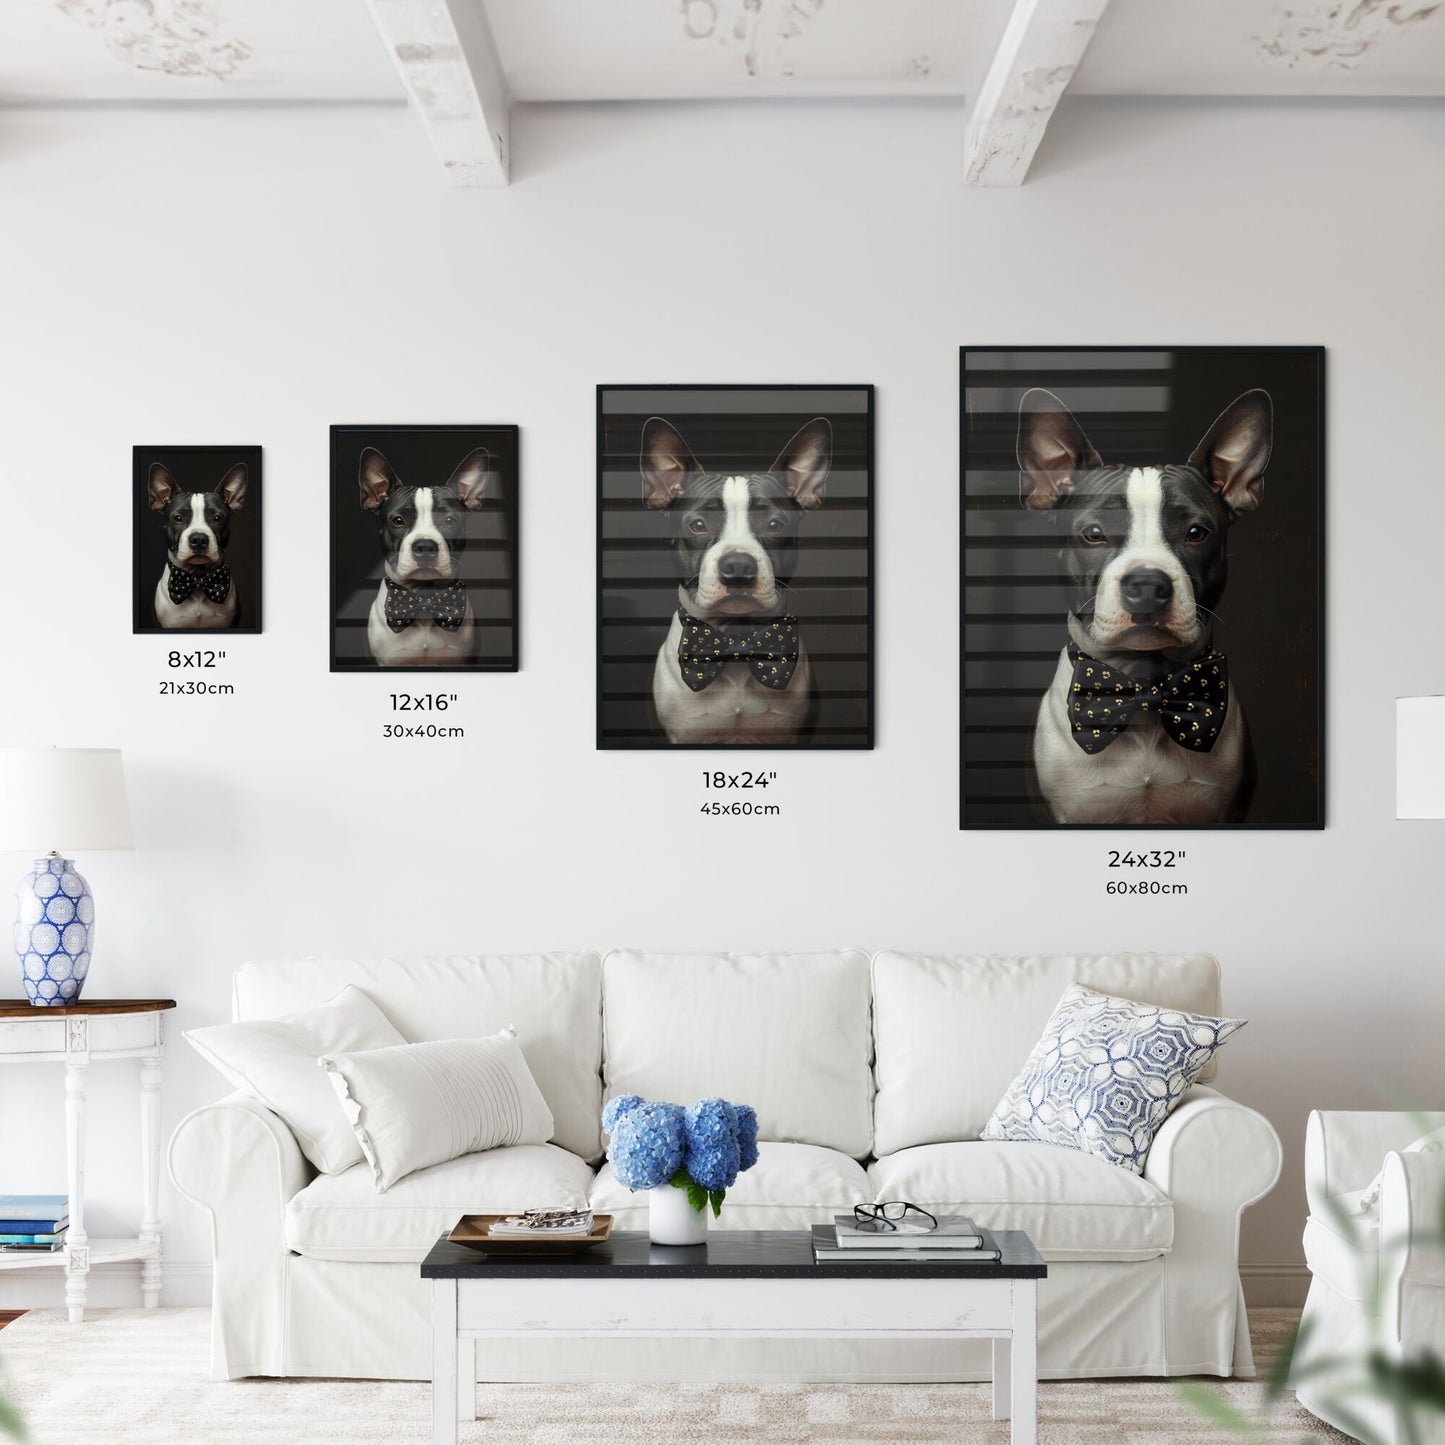 Expressive Artwork: Vibrant Portrait of a Distinguished Bull Terrier Adorned with a Bow Tie Default Title